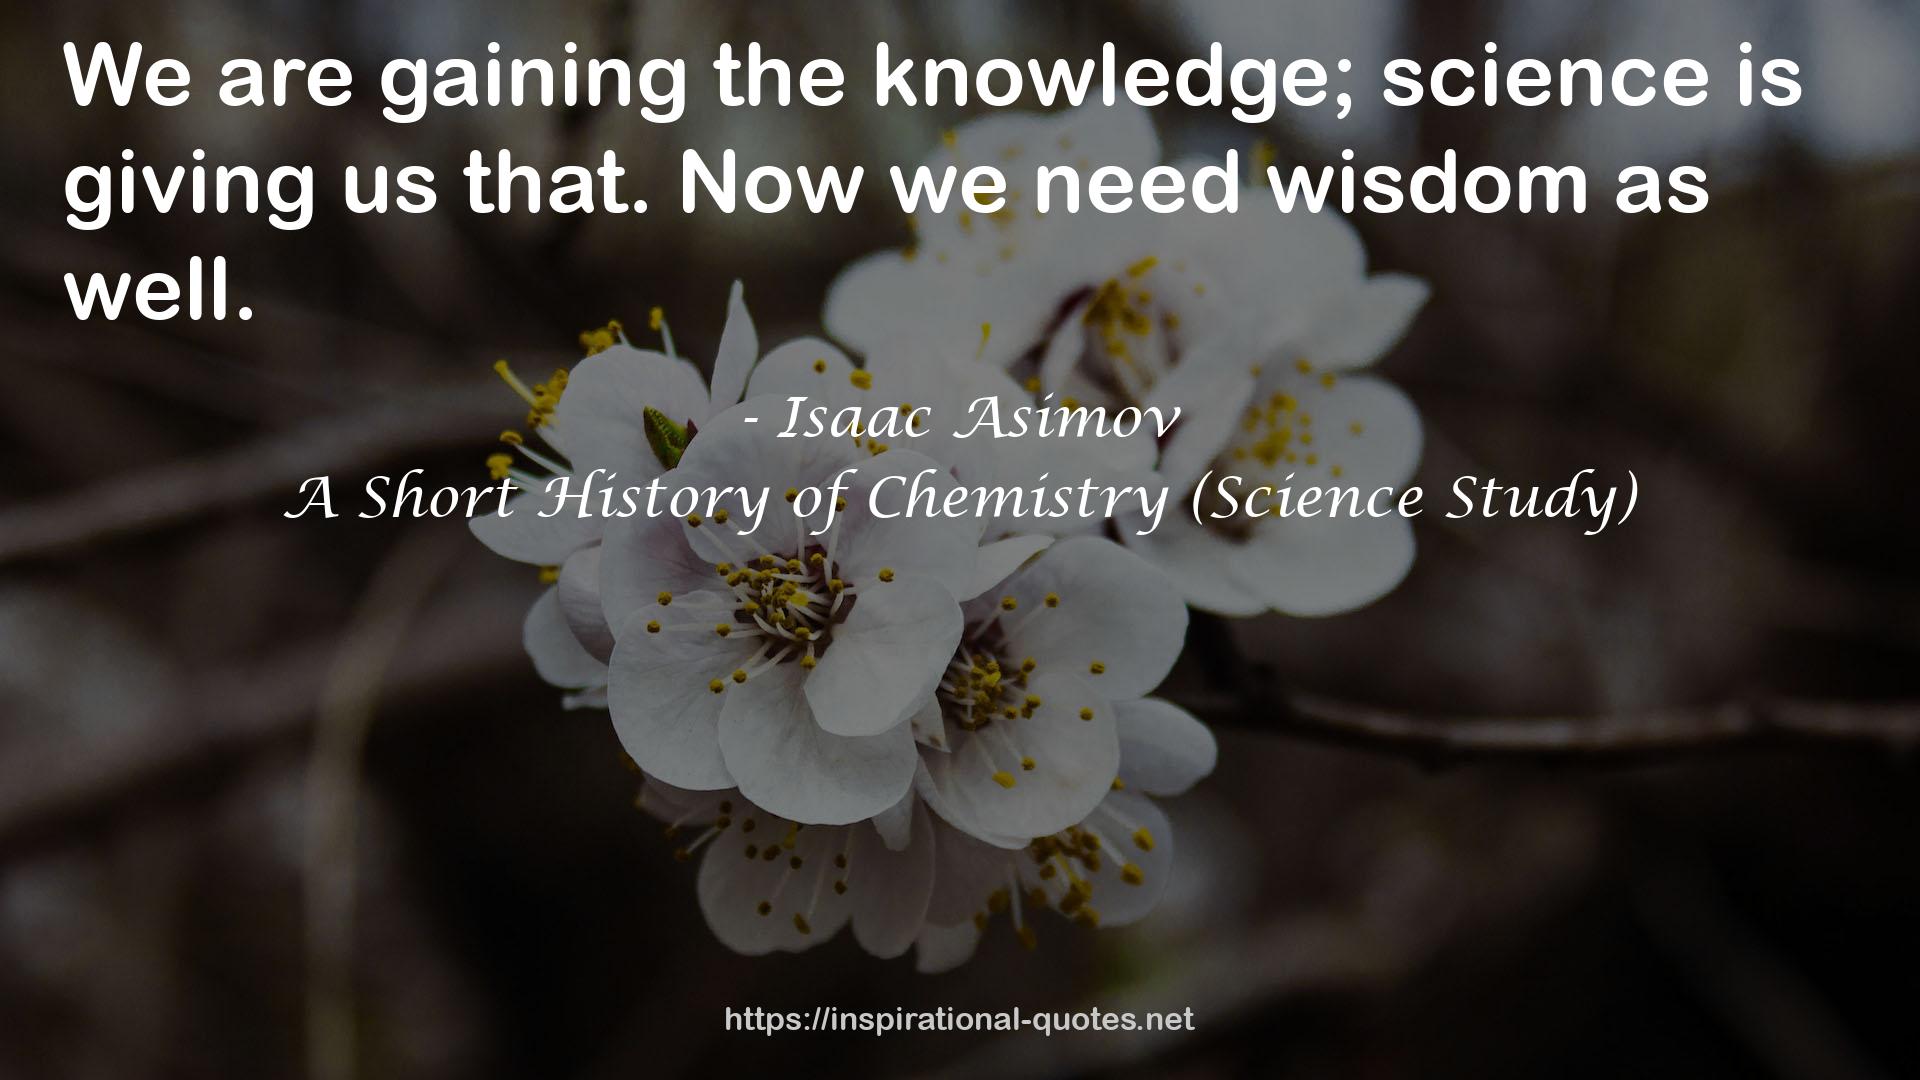 A Short History of Chemistry (Science Study) QUOTES